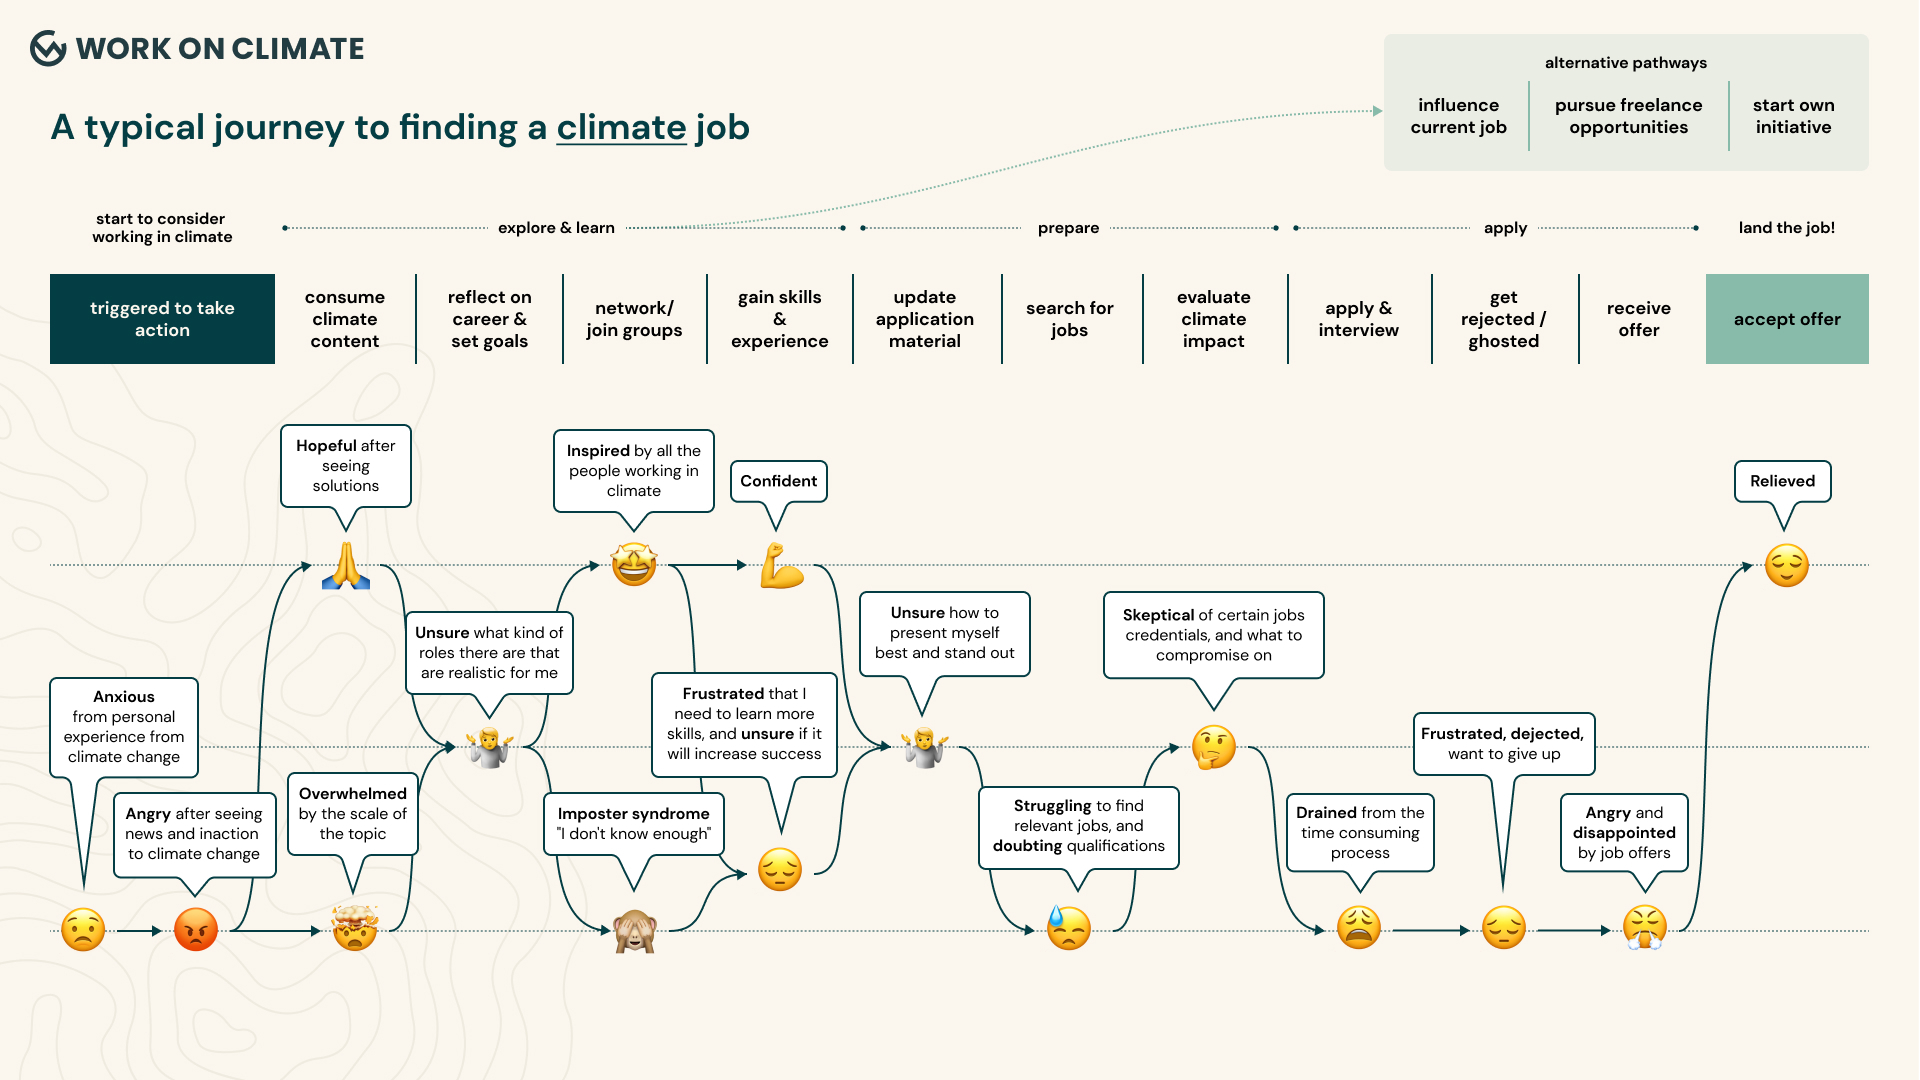 A flow chart showing the steps a typical climate job seeker takes to find work in climate.